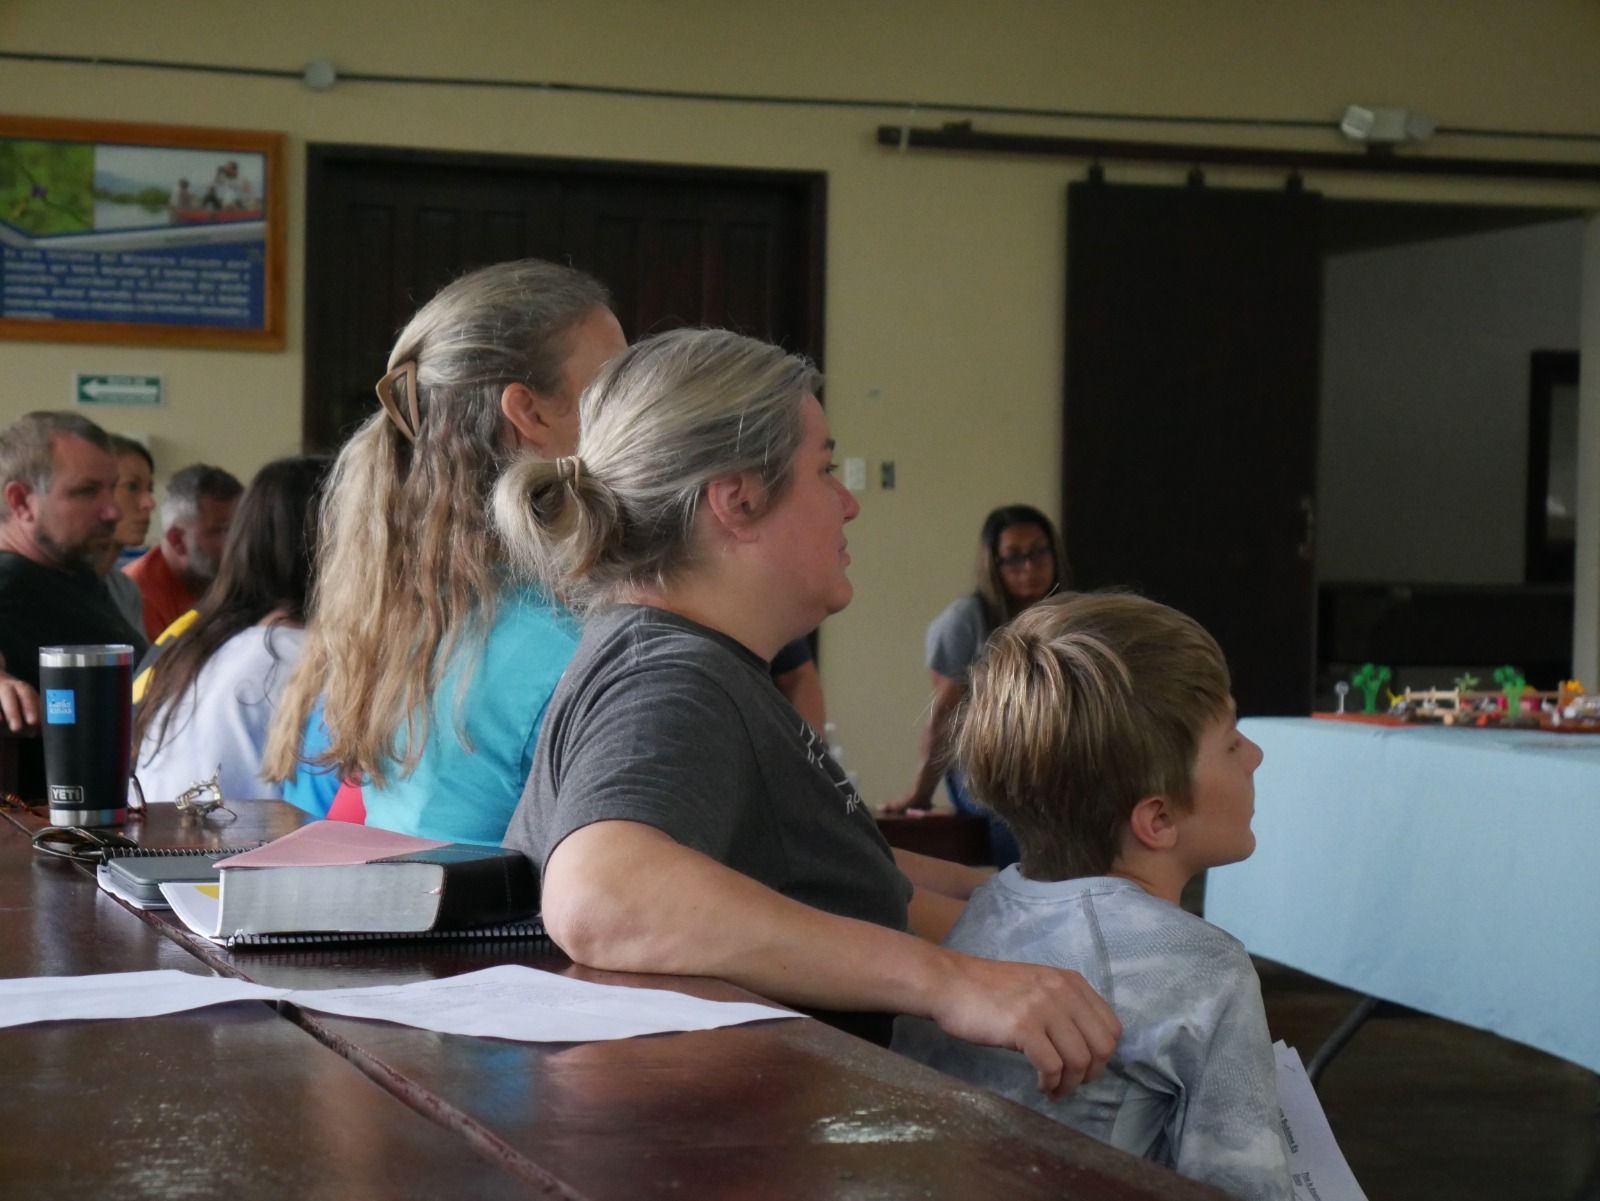 A family listens intently to the Kingdom Families camp speaker.